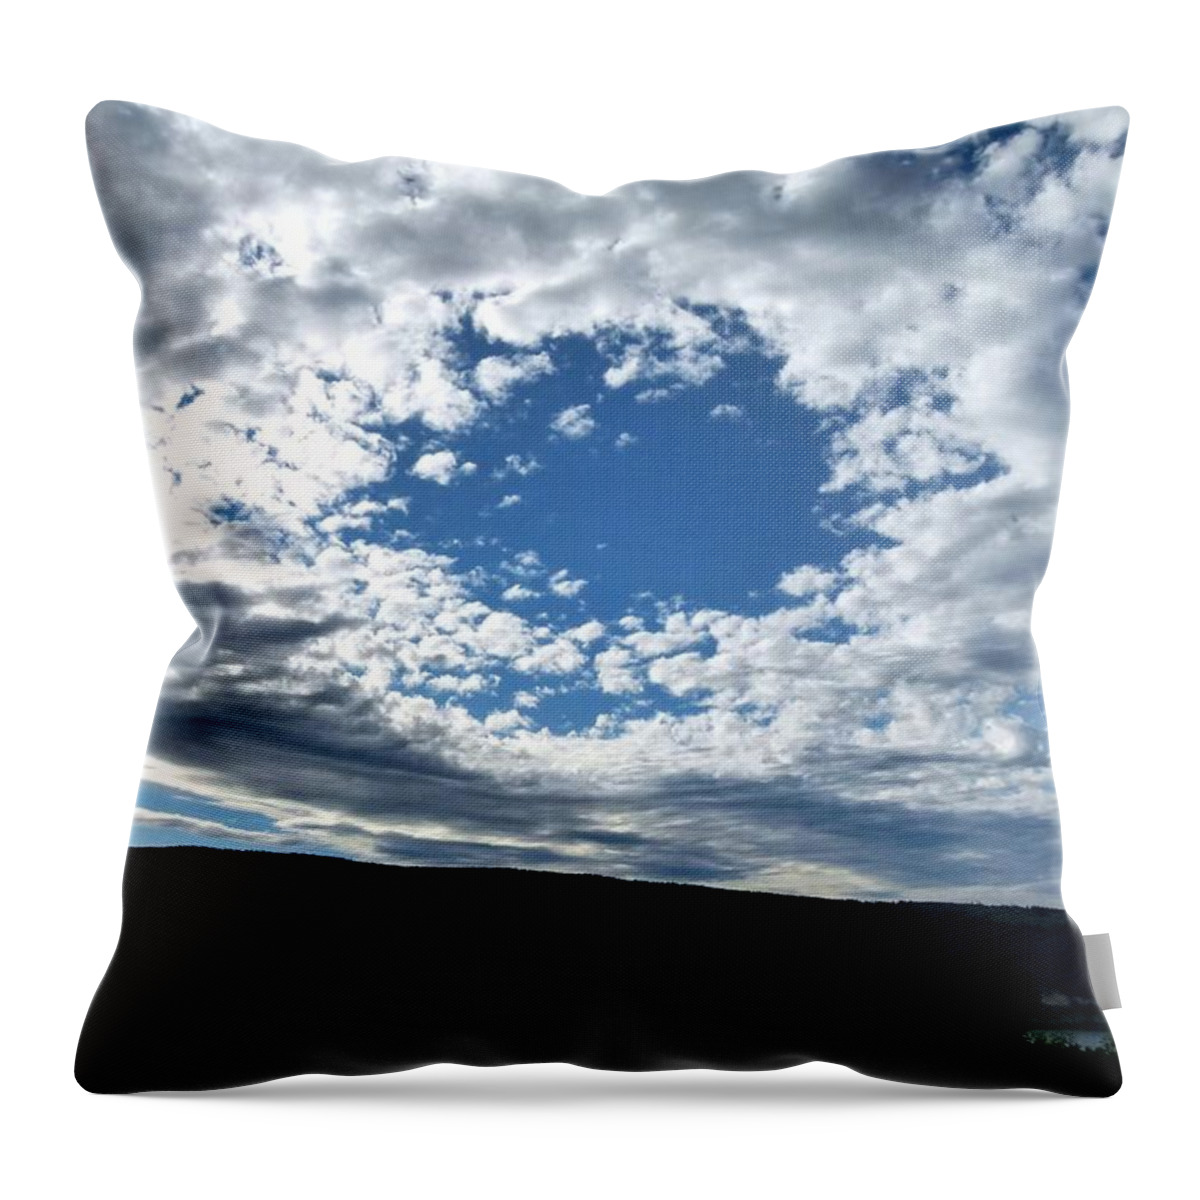 Cloud Nine 16 Throw Pillow featuring the photograph Cloud Nine 16 by Will Borden